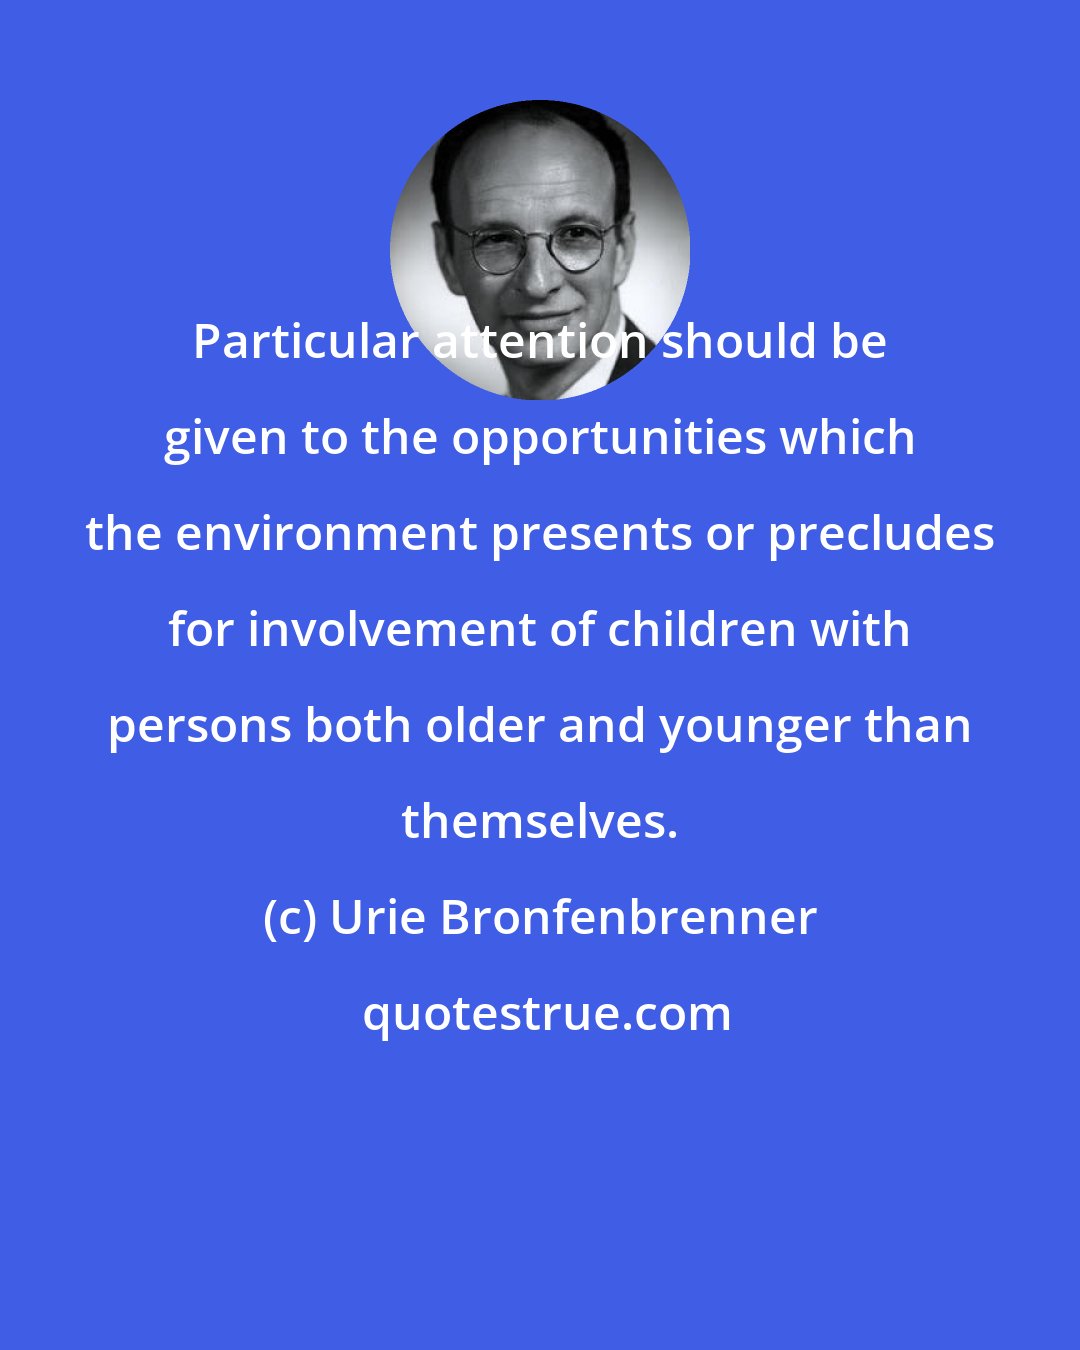 Urie Bronfenbrenner: Particular attention should be given to the opportunities which the environment presents or precludes for involvement of children with persons both older and younger than themselves.